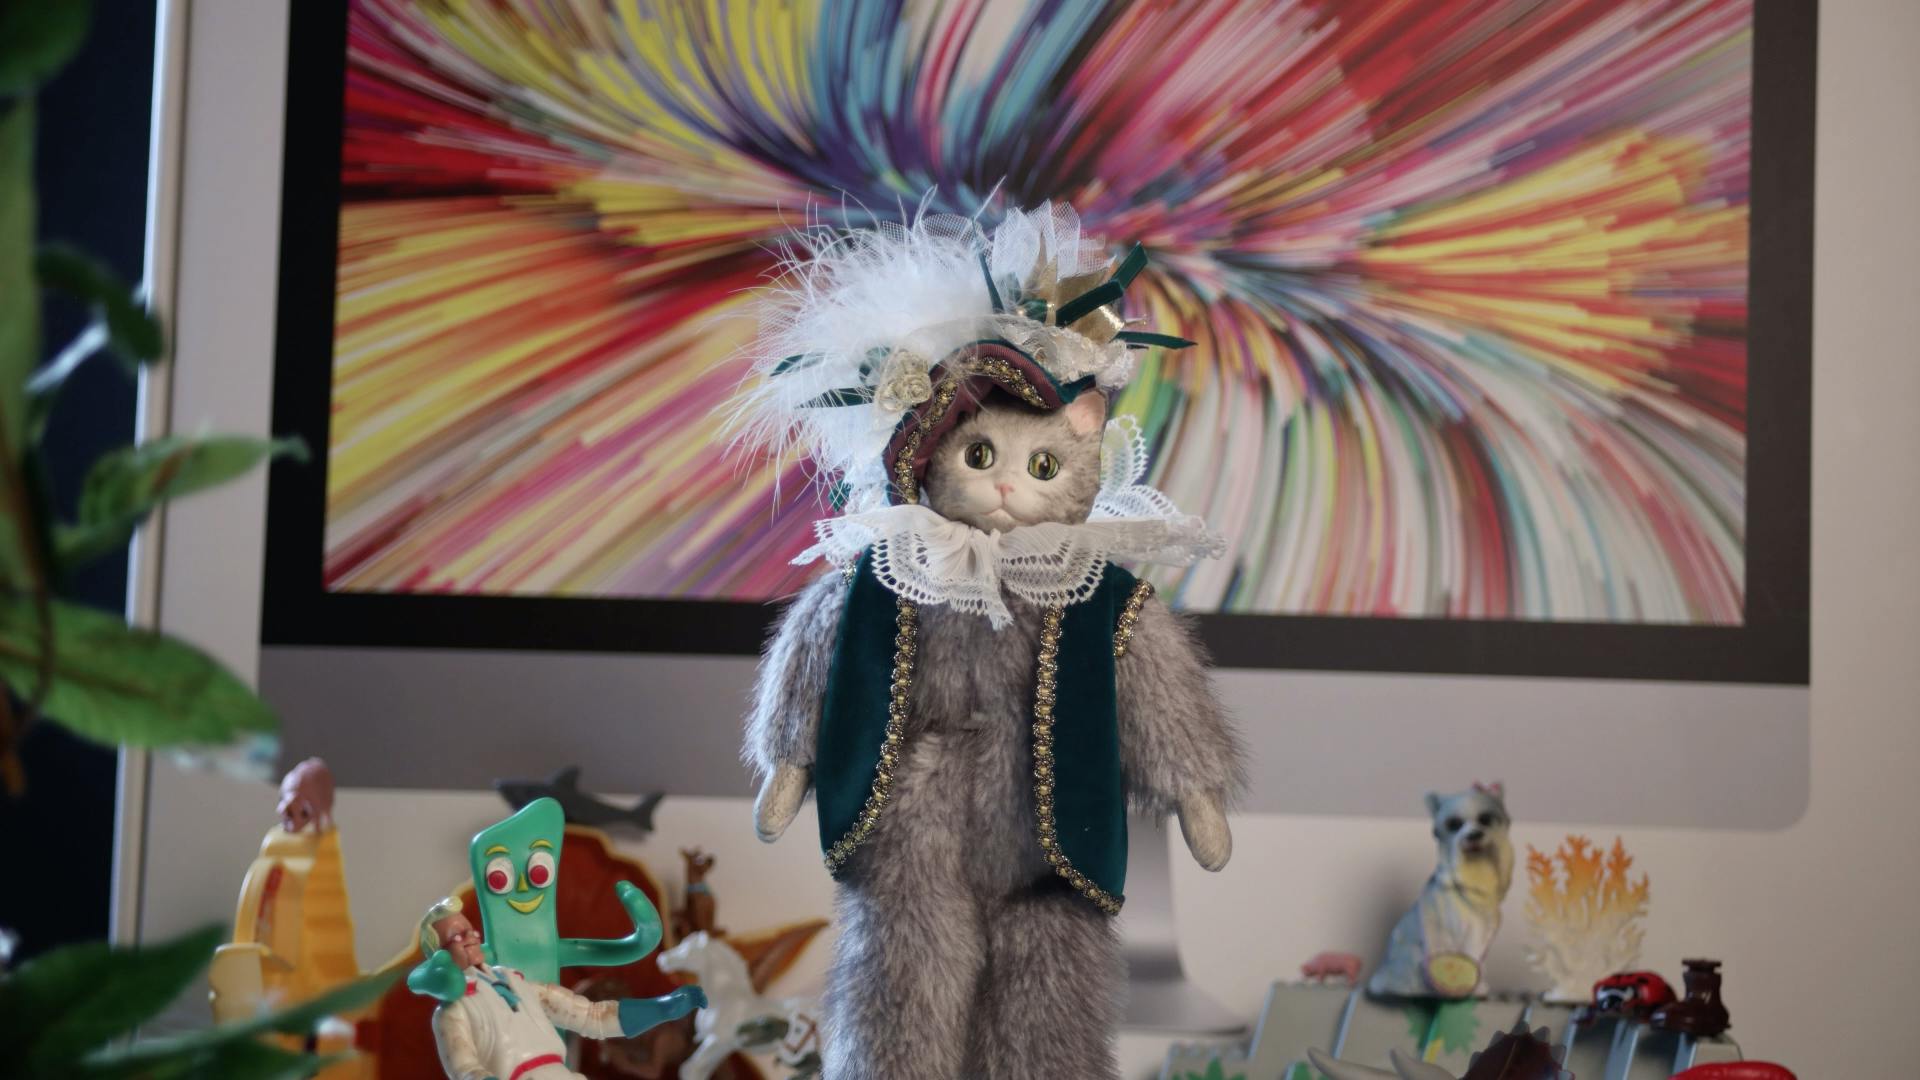 image of a plush cat in the middle of the frame, with various plastic figures around it